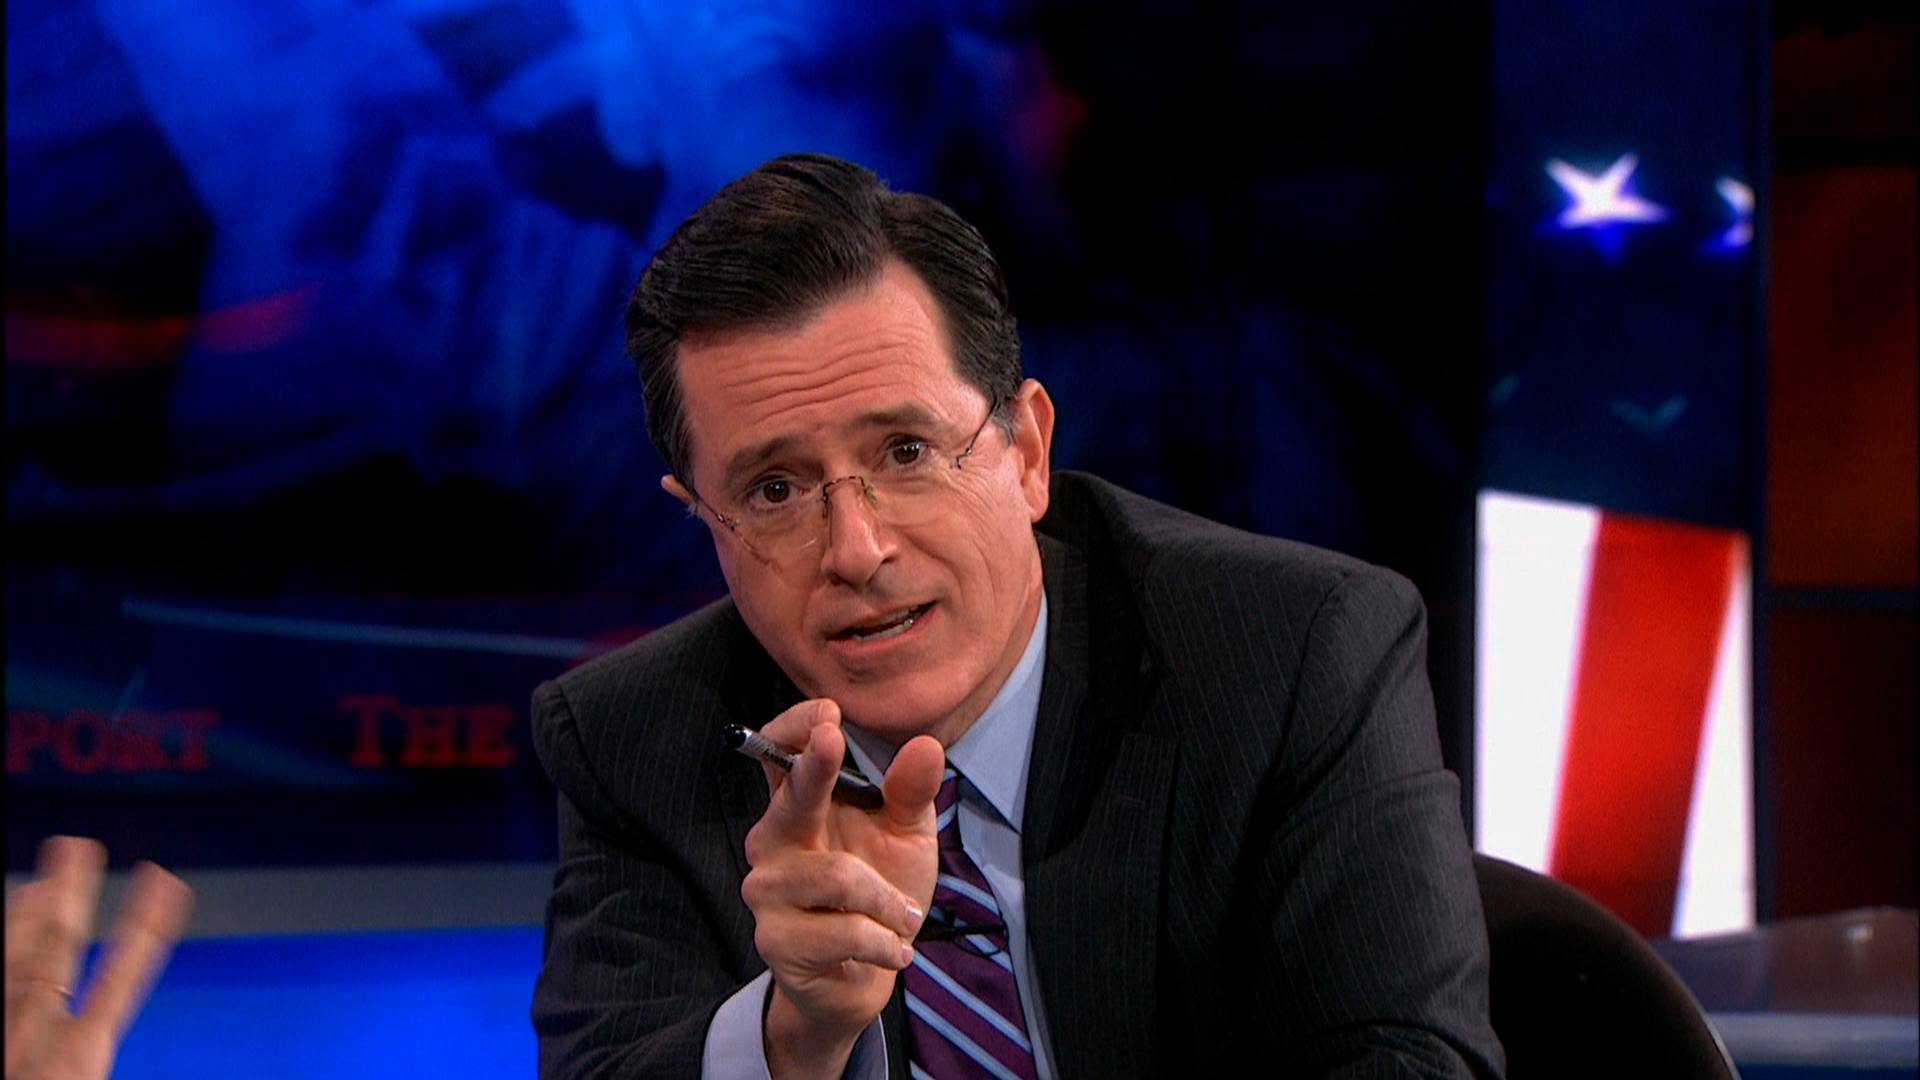 Stop Online Piracy Act - Danny & Zittrain - The Colbert Report (Video Clip) | Comedy Central US